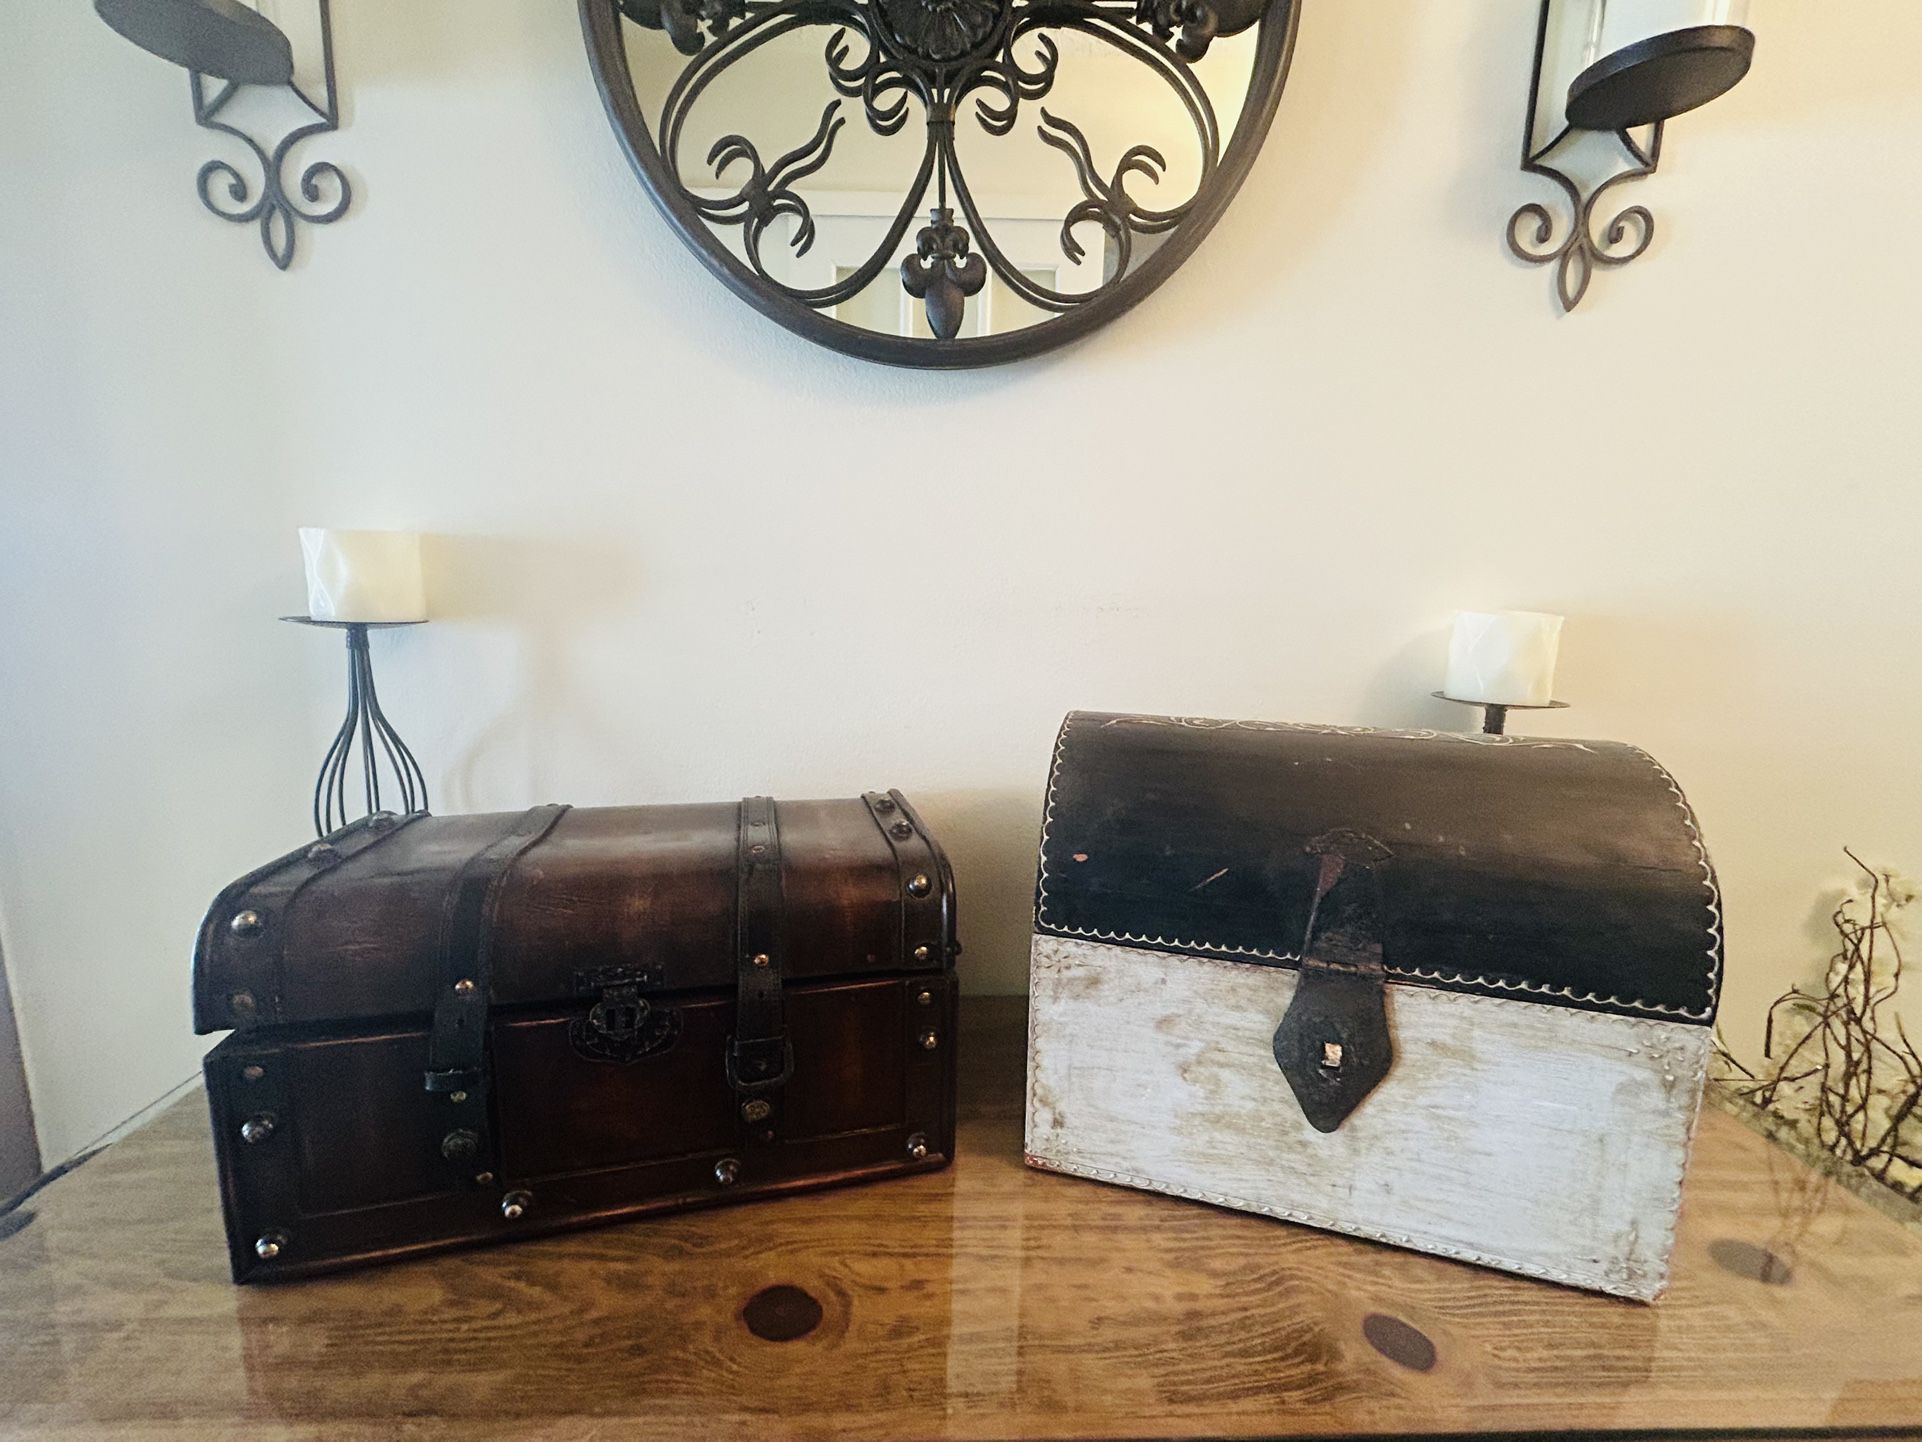 Decorative Table Top Trunks (Different Prices, Listed in Descriptions)